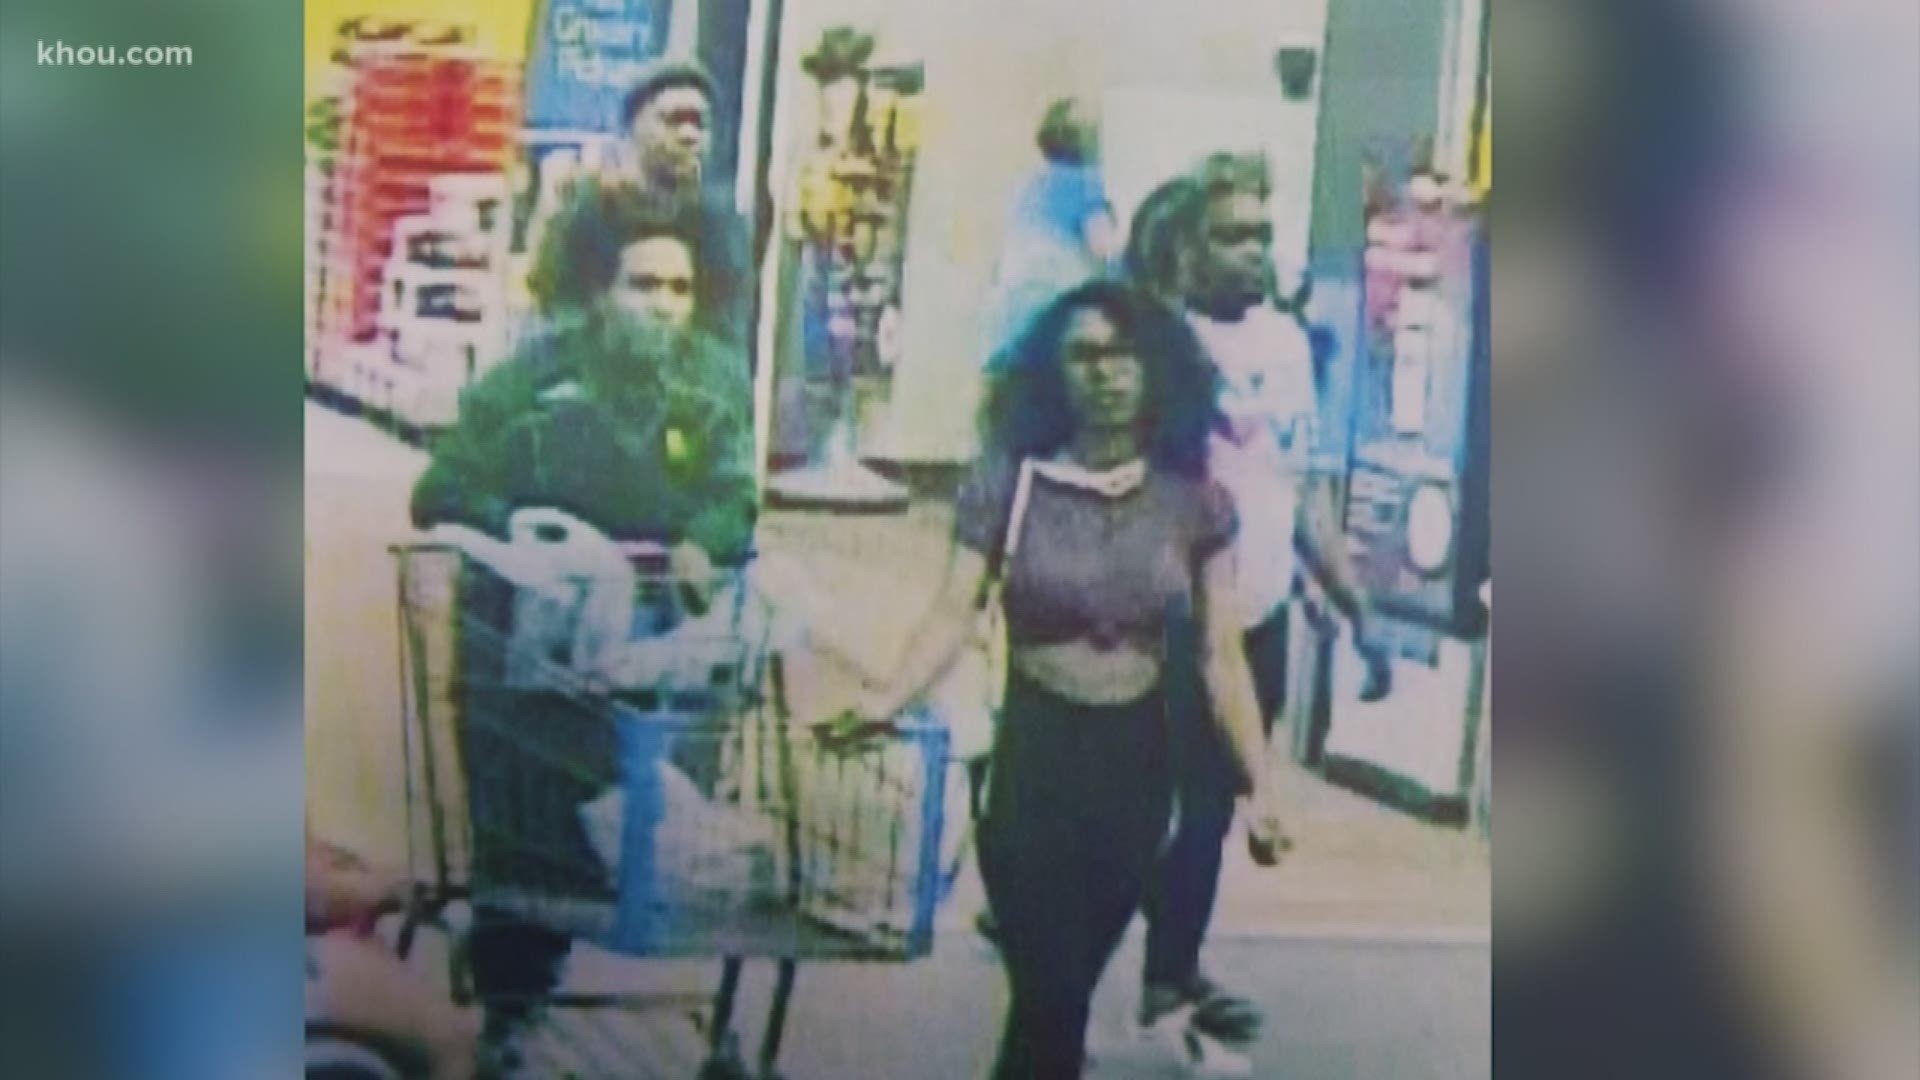 Police are looking for the woman seen licking Blue Bell ice cream from the carton then putting it back on the store shelf in a viral video. They are also looking for the man who recorded the video.